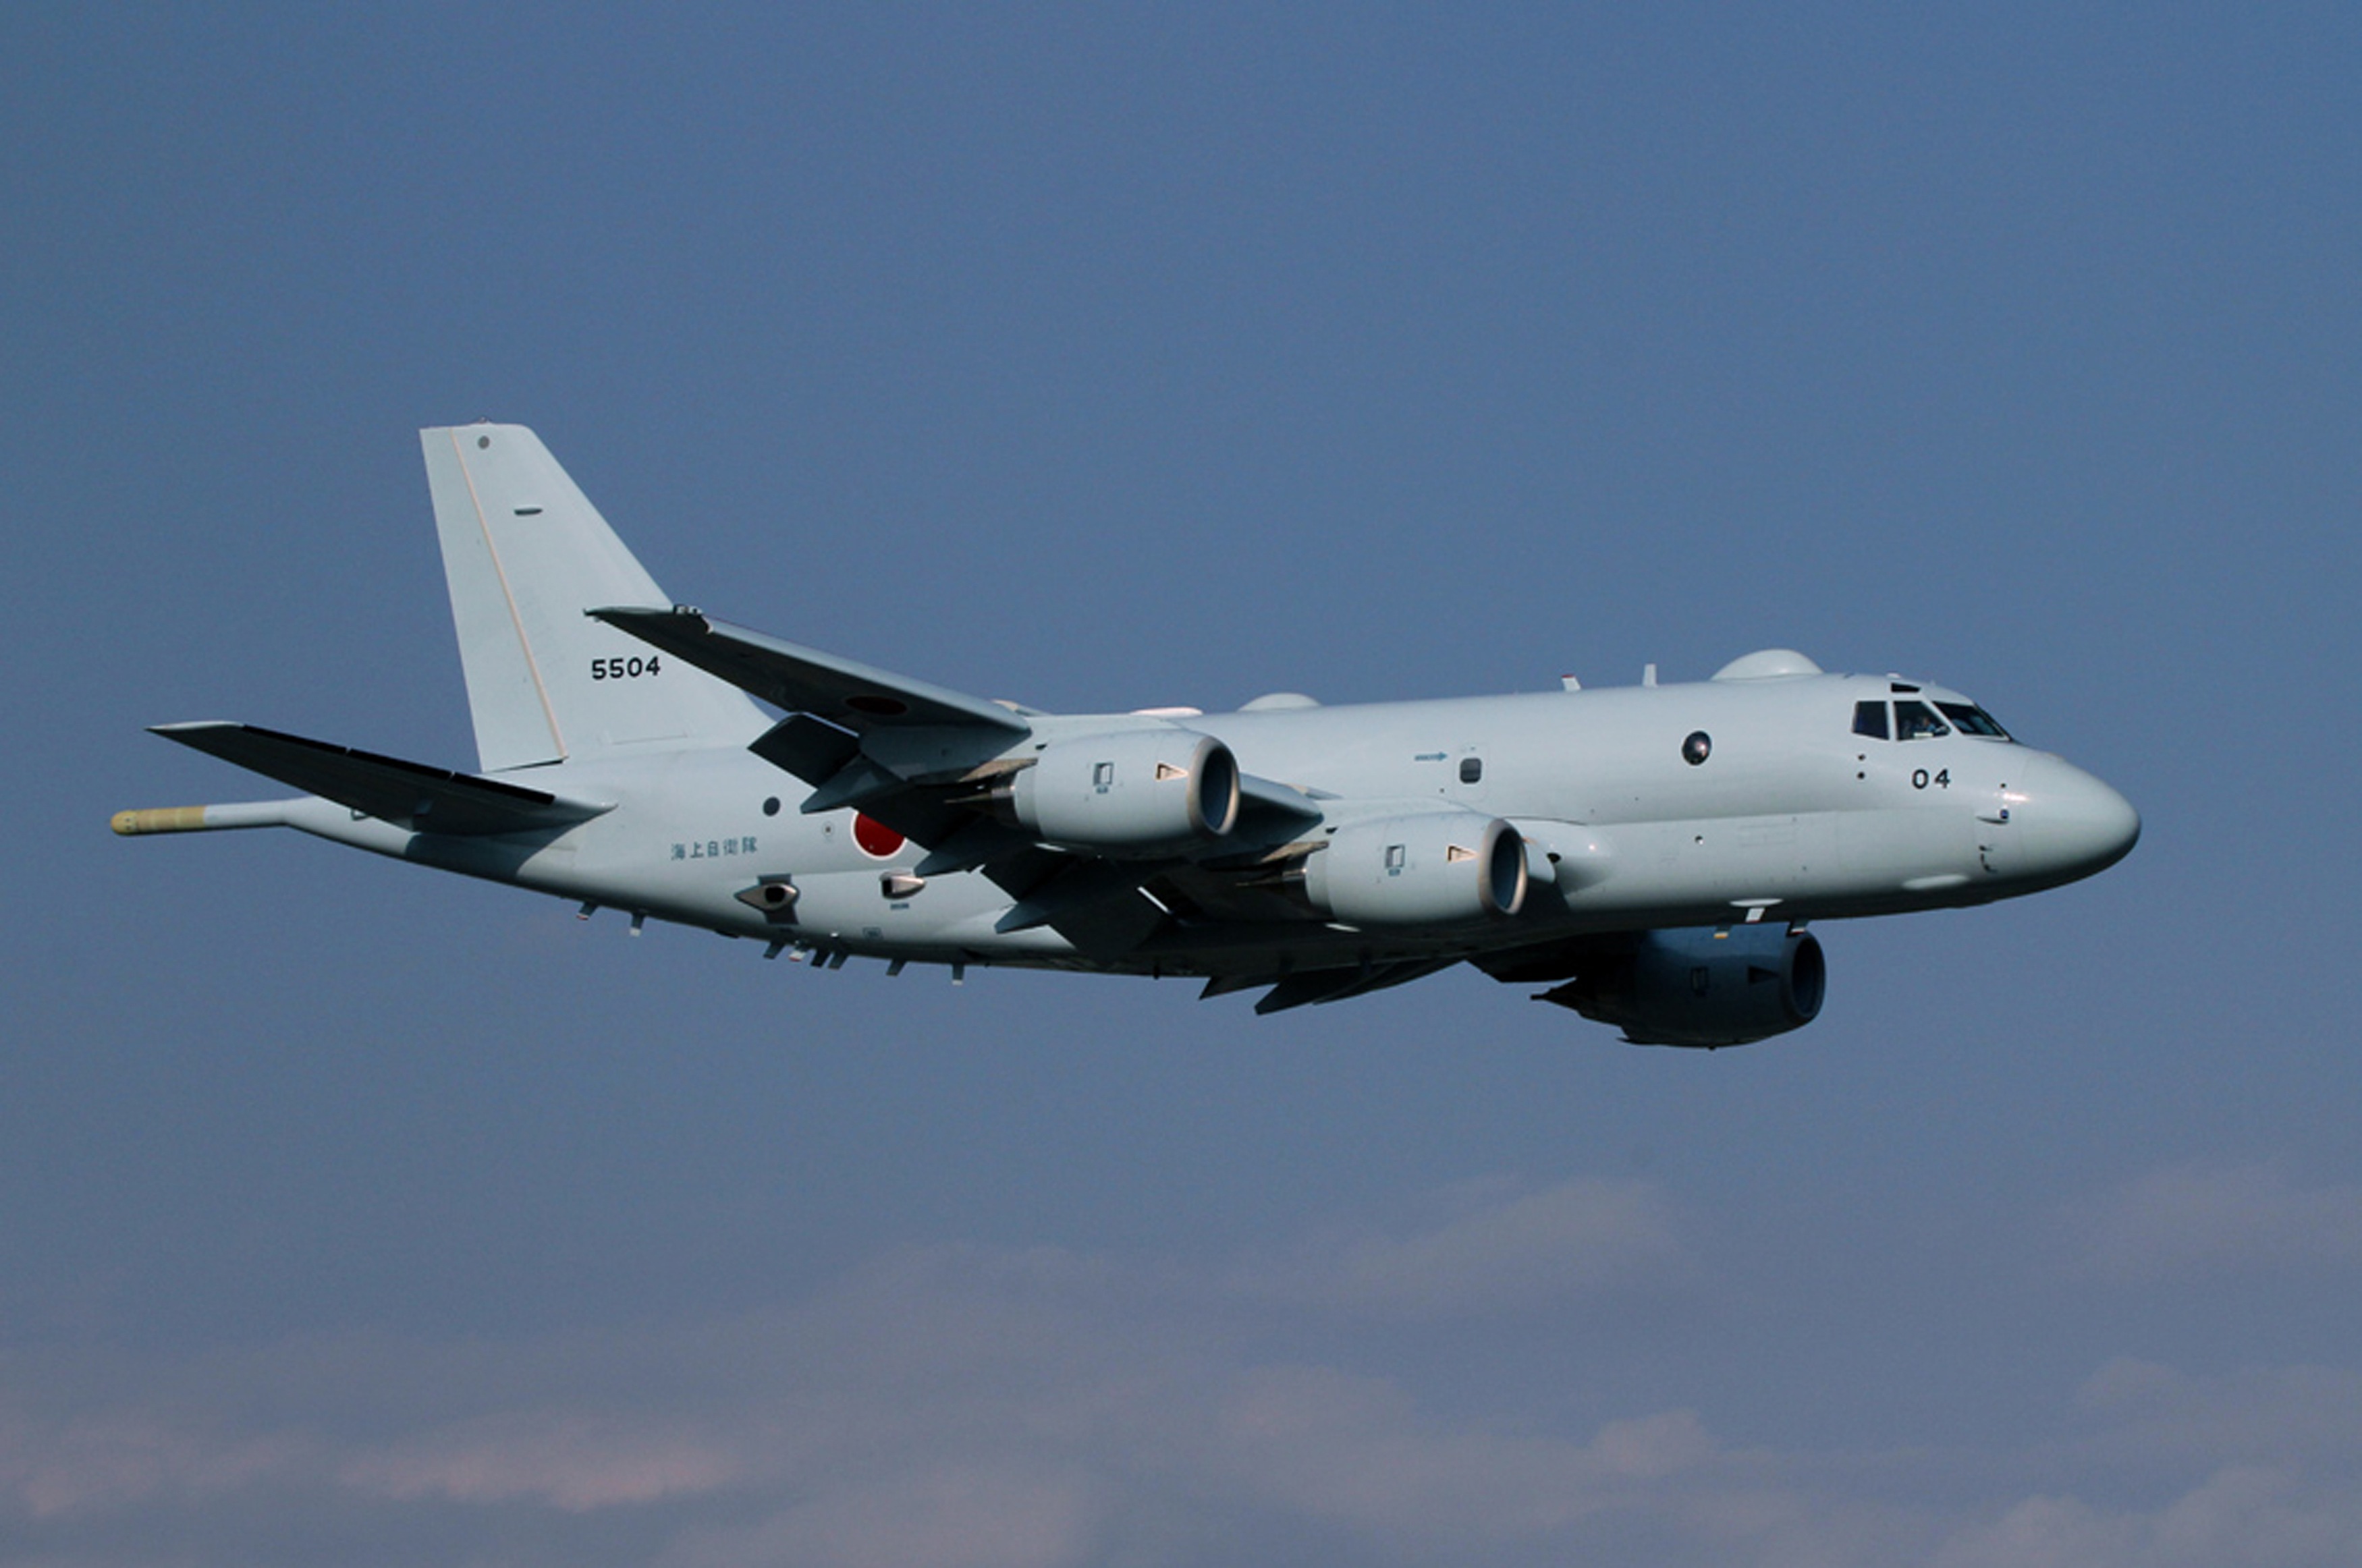 A Japan Maritime Self-Defense Forces P-1 submarine-hunting aircraft is seen in this undated photo handed out by the Japan Maritime Self-Defense Forces. Photo: Reuters